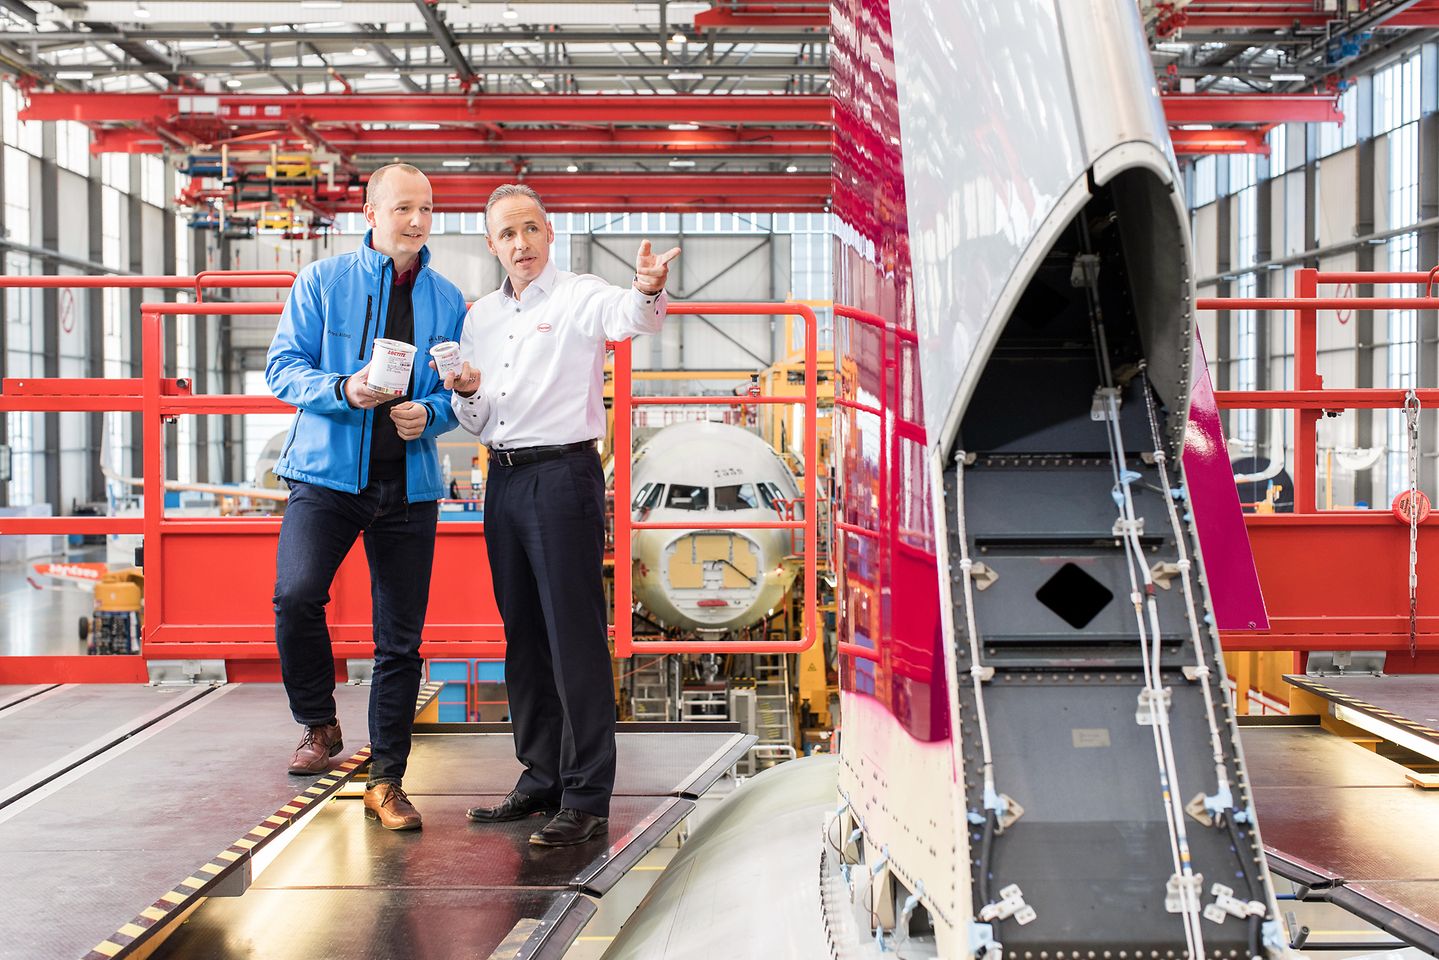 Airbus assembly hall in Hamburg: Guido Adolph from Henkel (right) discussing with Andre Aldag